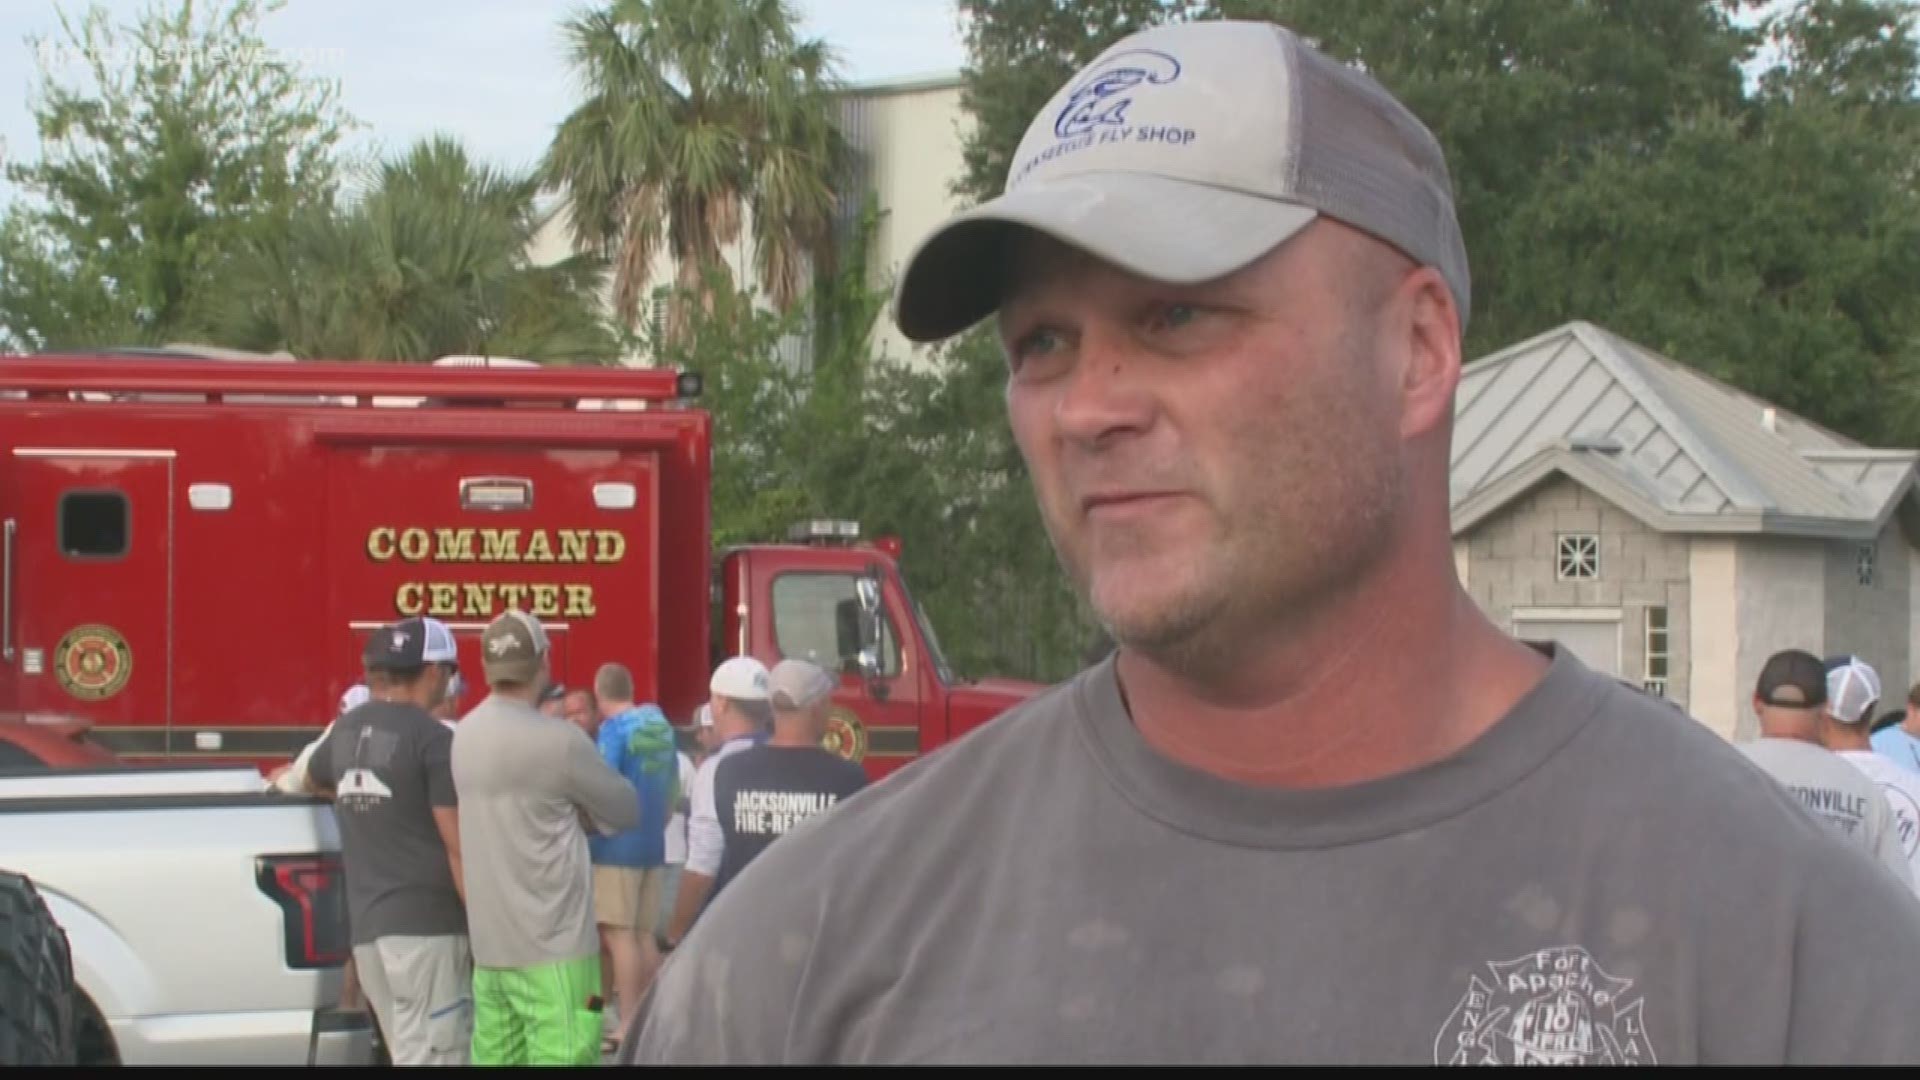 The search is still on for a missing firefighter from the Jacksonville Fire and Rescue Department and his friend, a firefighter from Fairfax, Va., after neither returned from a fishing trip near Port Canaveral.